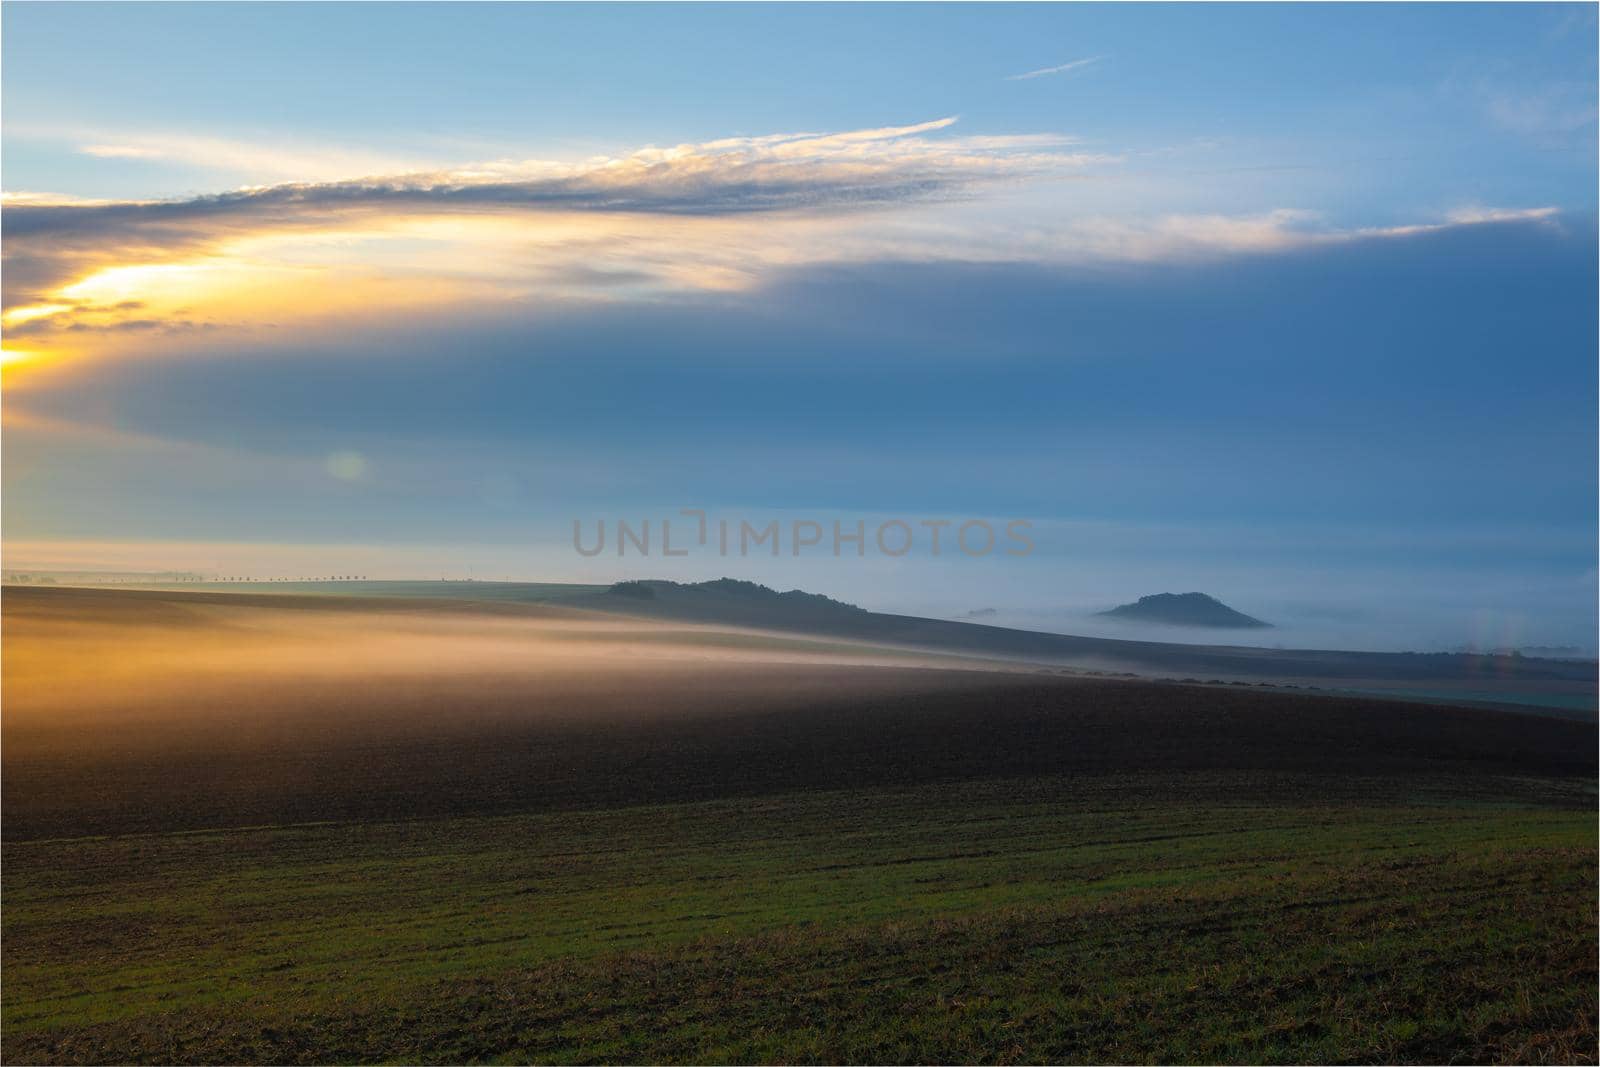 Landscape covered with fog in Central Bohemian Uplands, Czech Republic. Central Bohemian Uplands is a mountain range located in northern Bohemia. The range is about 80 km long